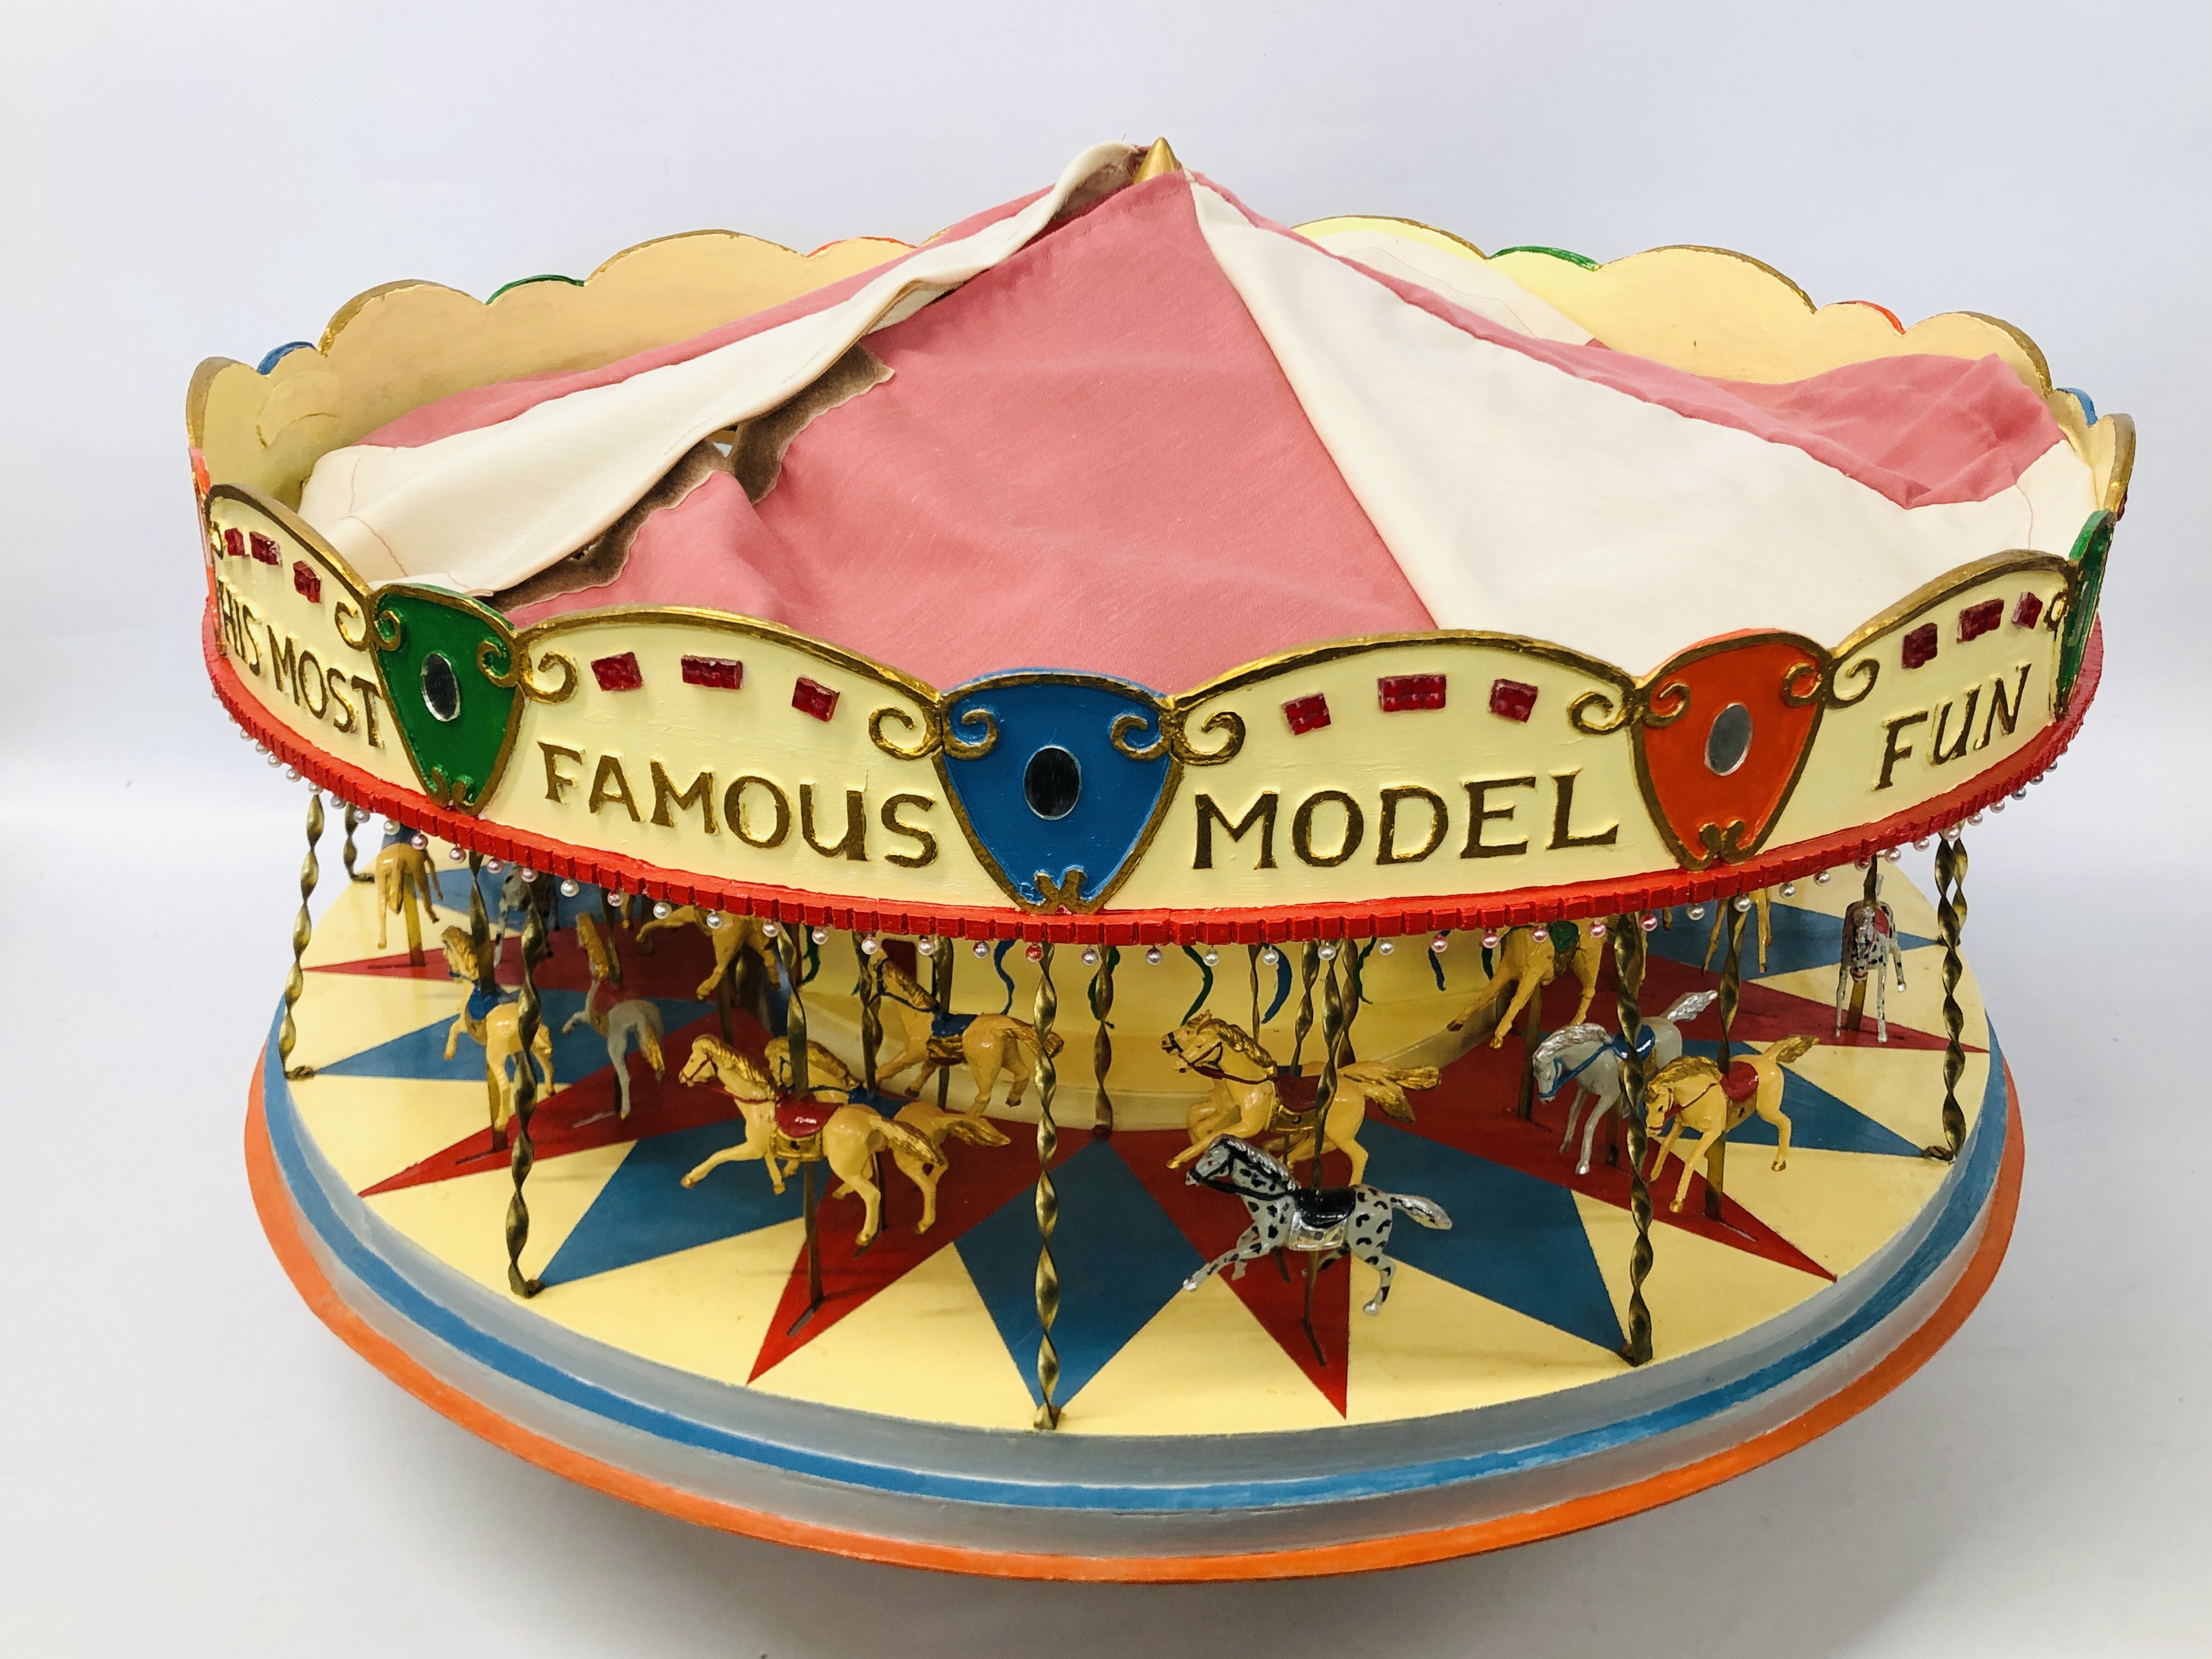 A VINTAGE HANDCRAFTED WOODEN MODEL OF A FAIRGROUND CAROUSEL WITH MOTORISED ACTION AND LIGHTS - - Image 2 of 10